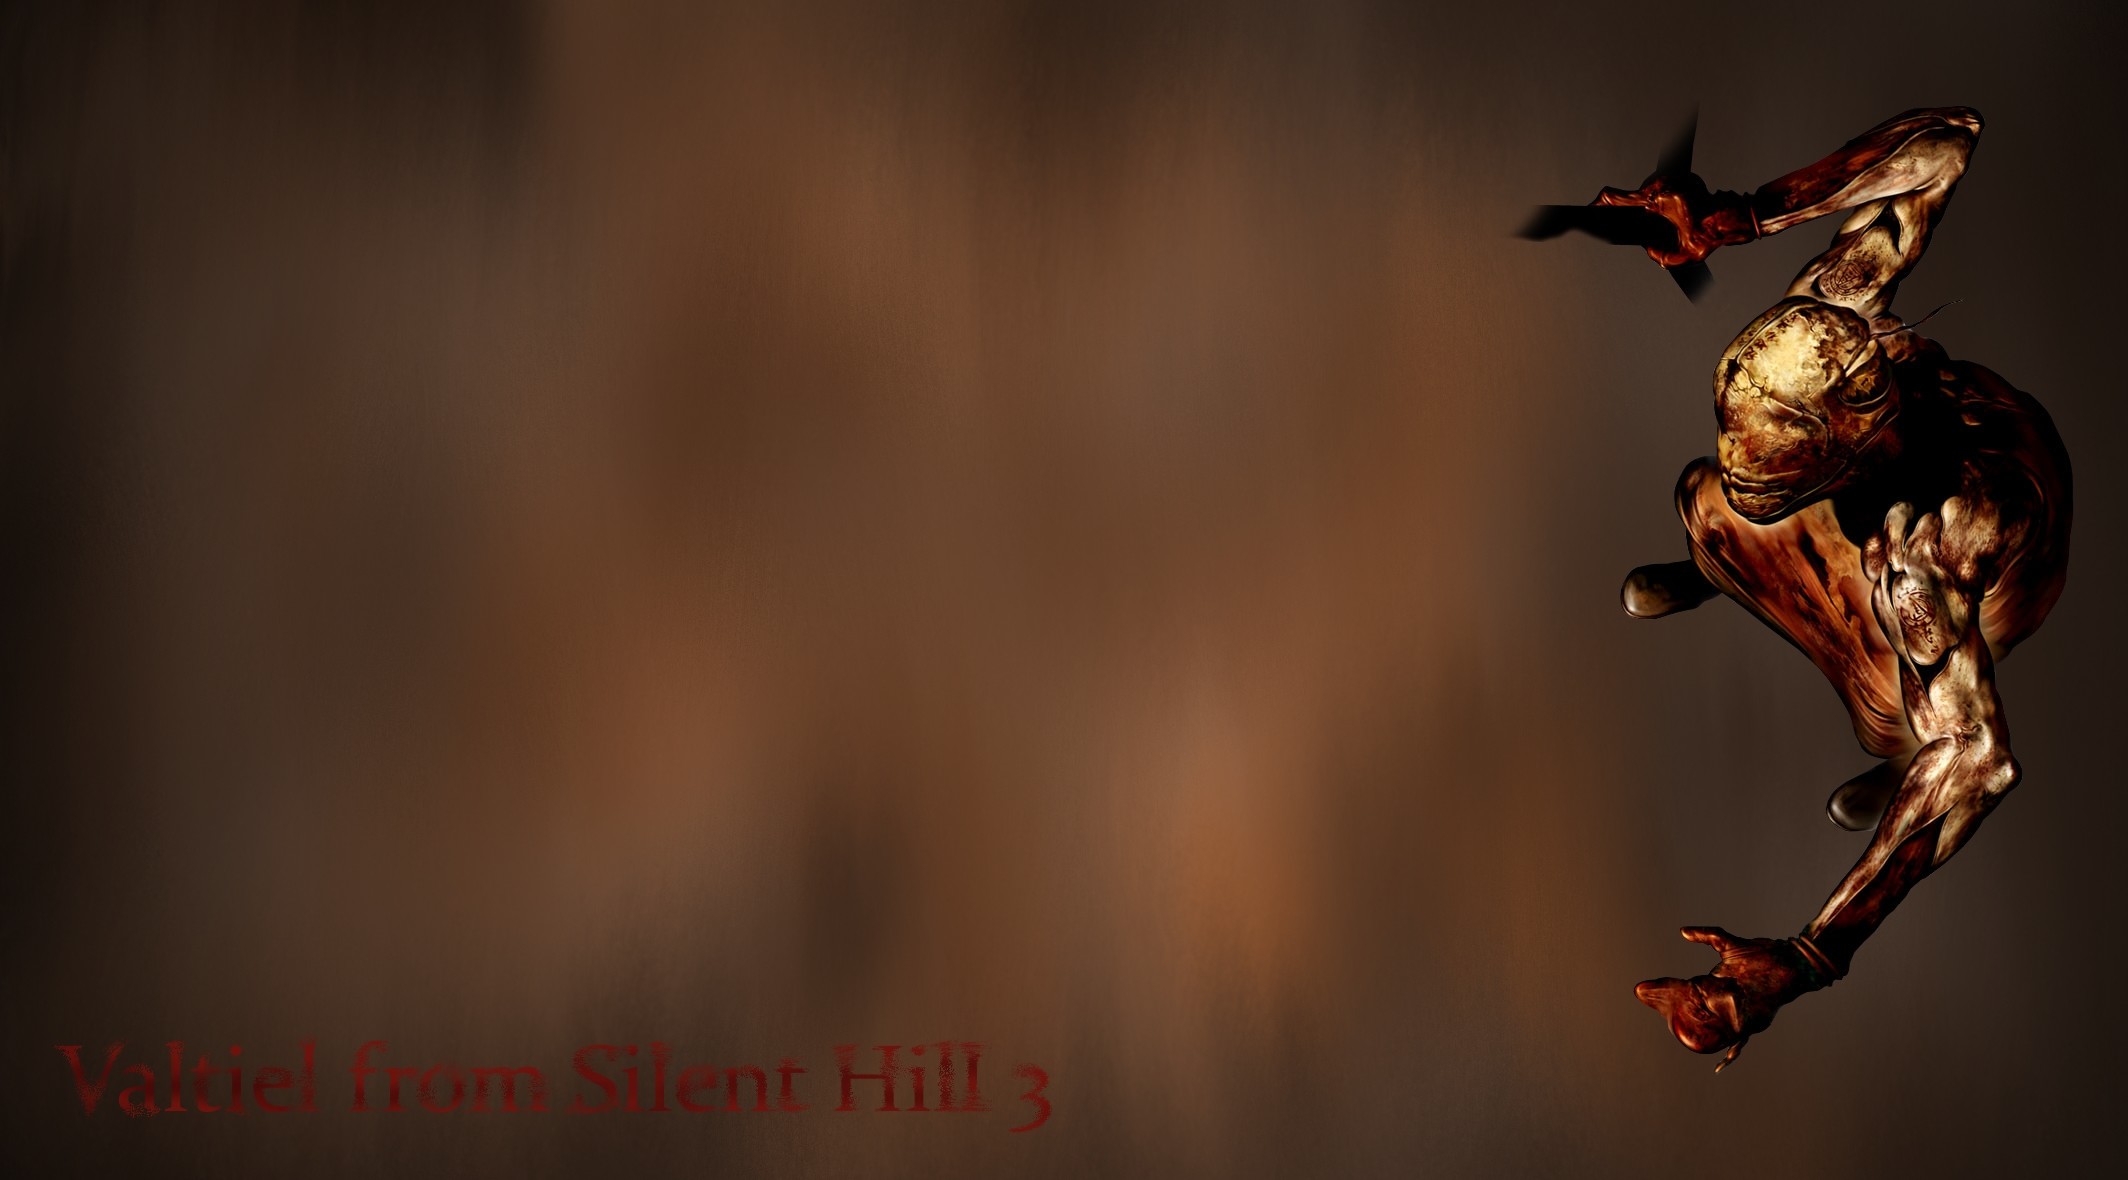 2128x1180 ... Valtiel from Silent Hill 3 with Background by schloemixi